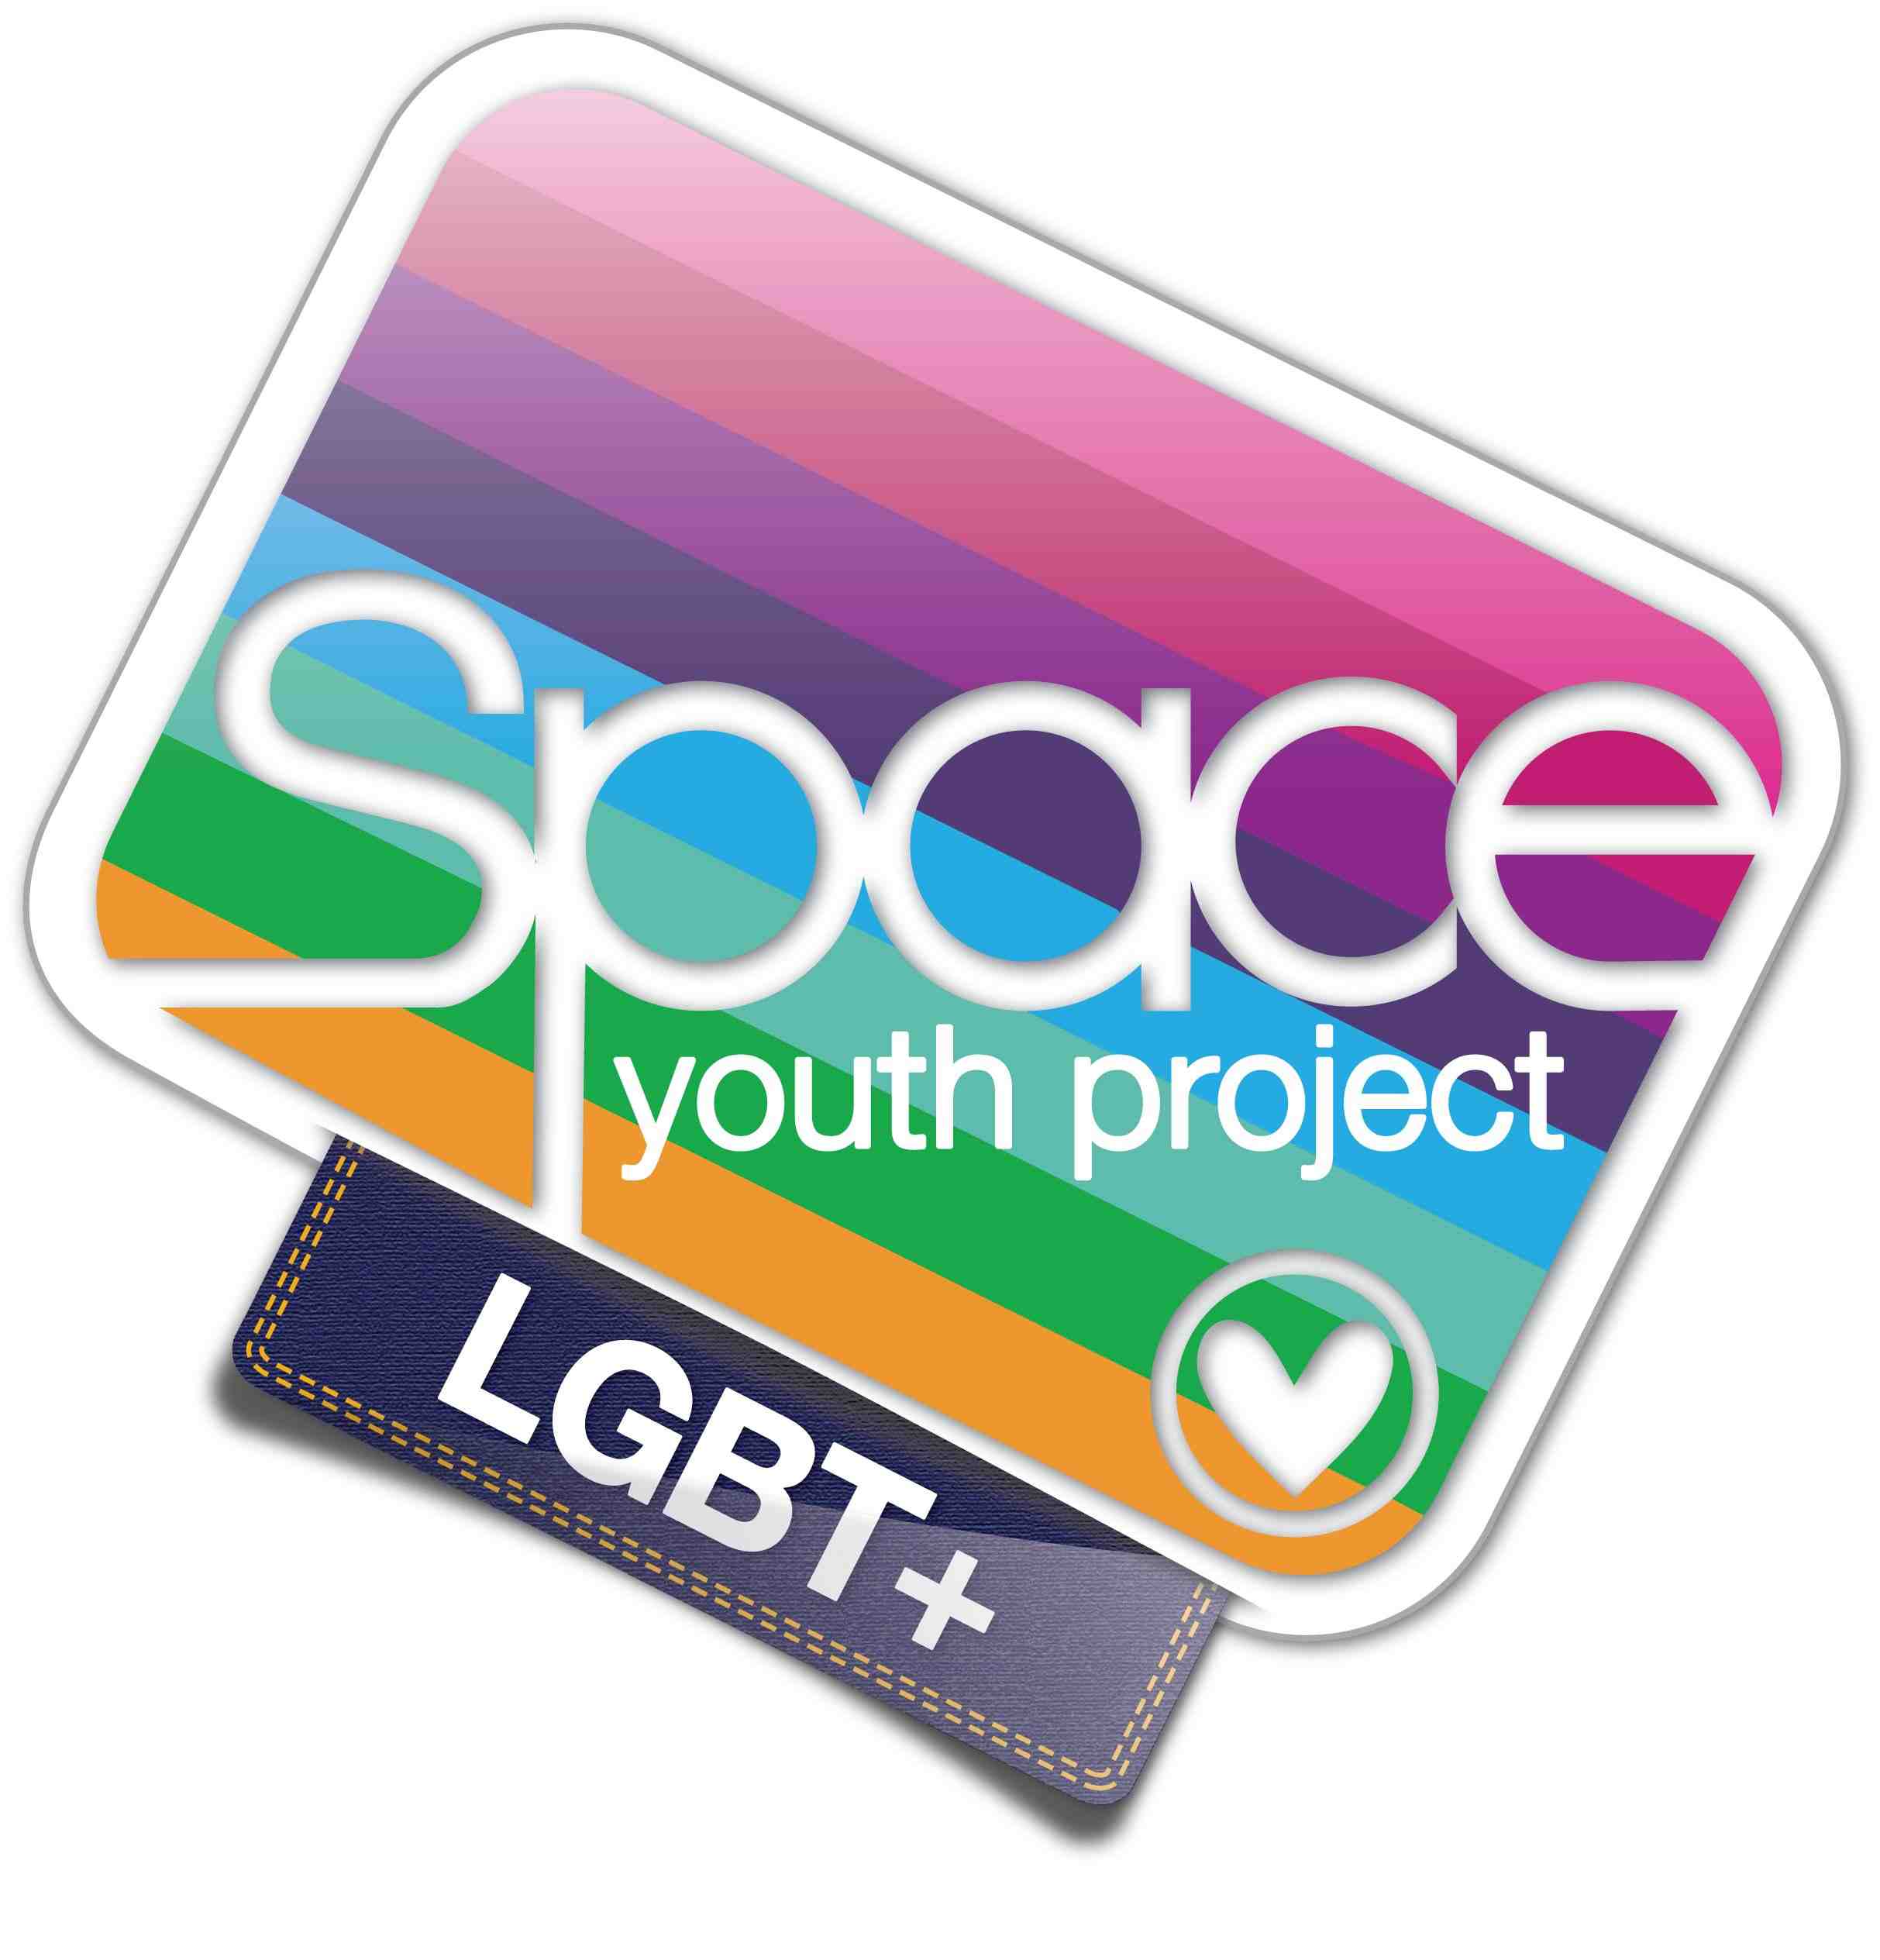 Space youth project logo